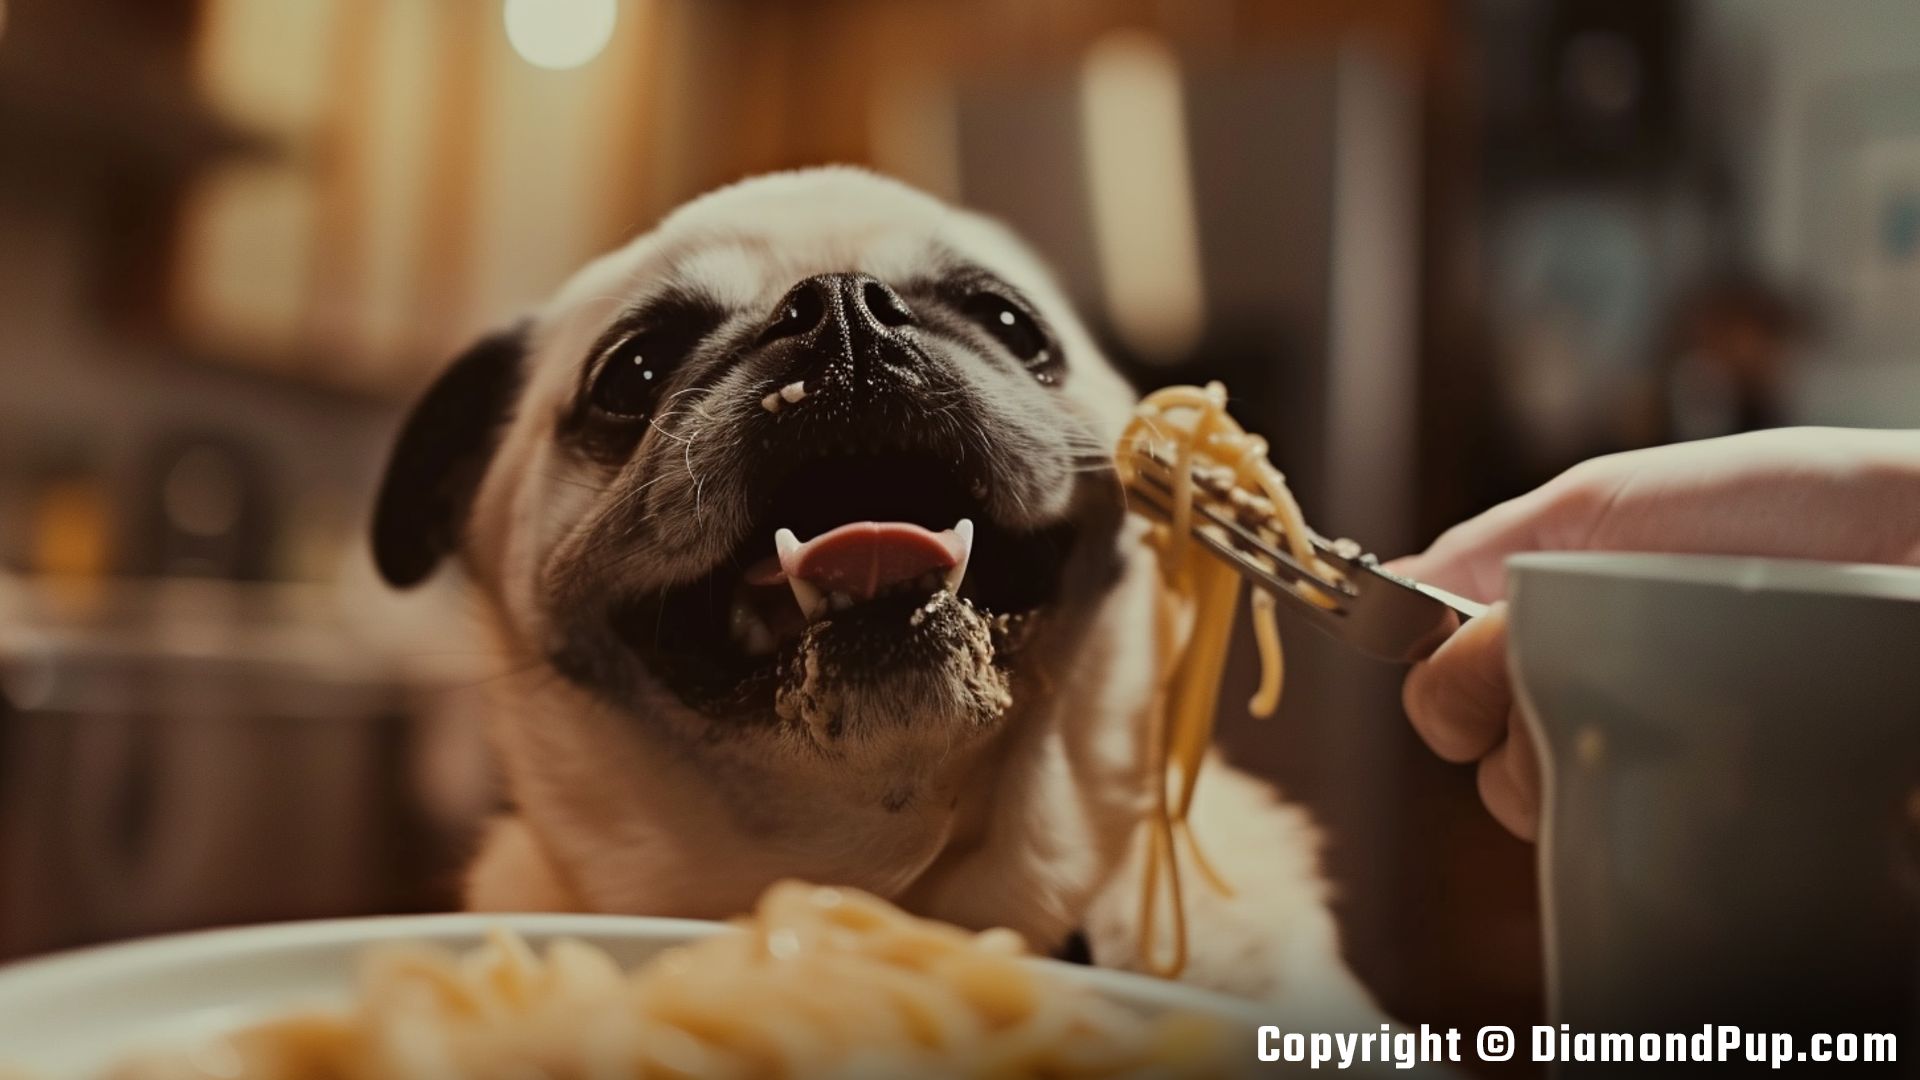 Image of Pug Snacking on Pasta